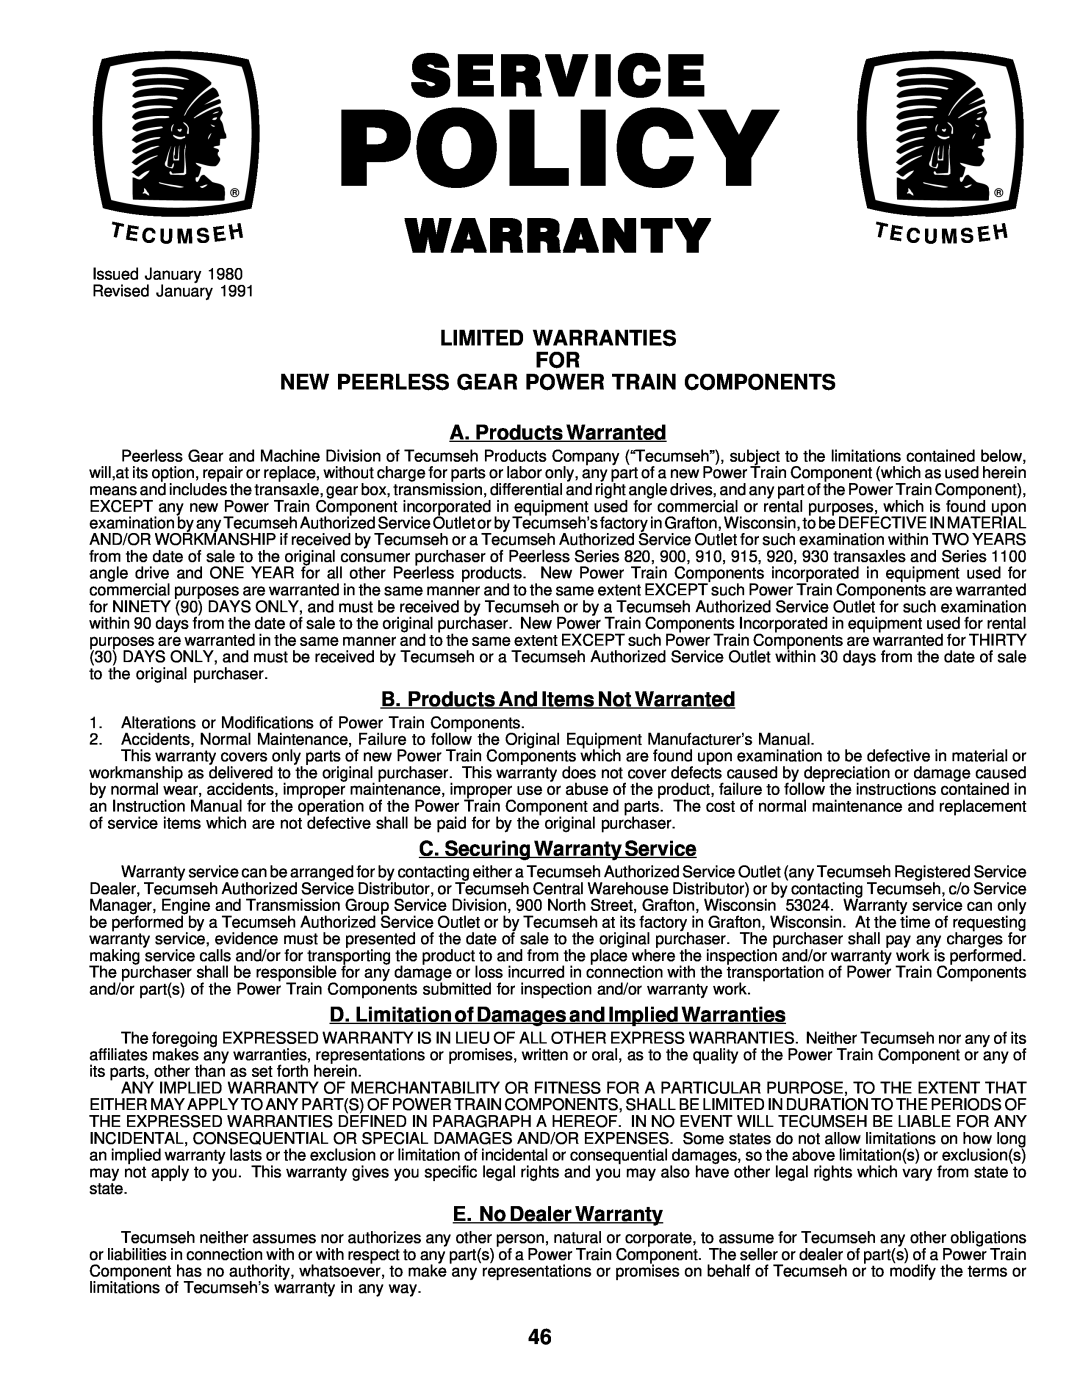 Poulan PRK17G42STA Warranty, Limited Warranties For New Peerless Gear Power Train Components, T E C U M S Eh, Policy 